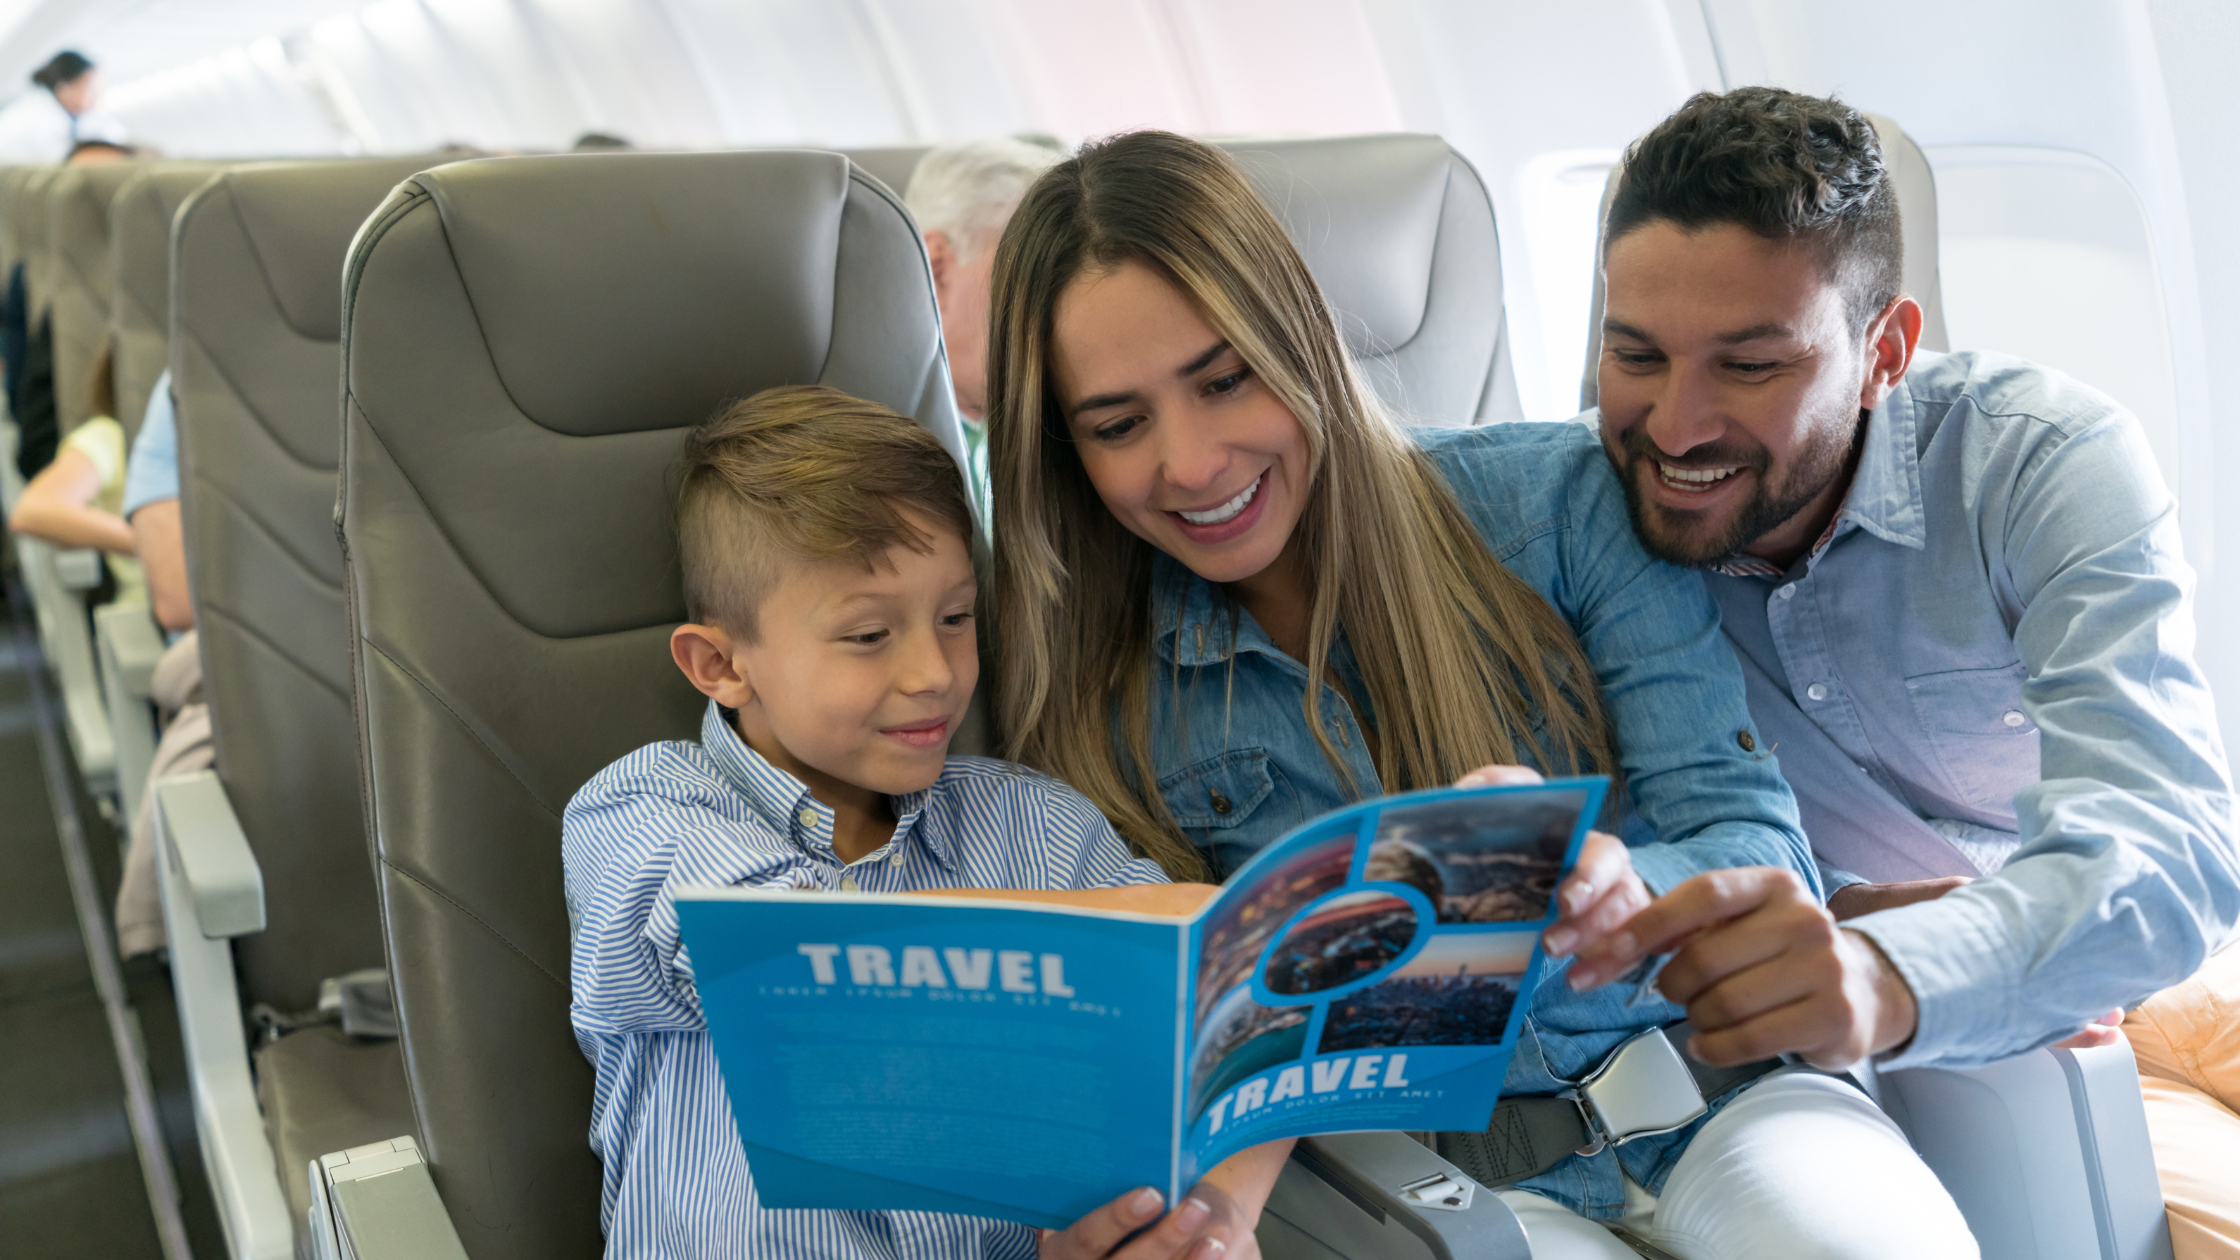 man, woman and child on airplane holding a travel magazine and smiling